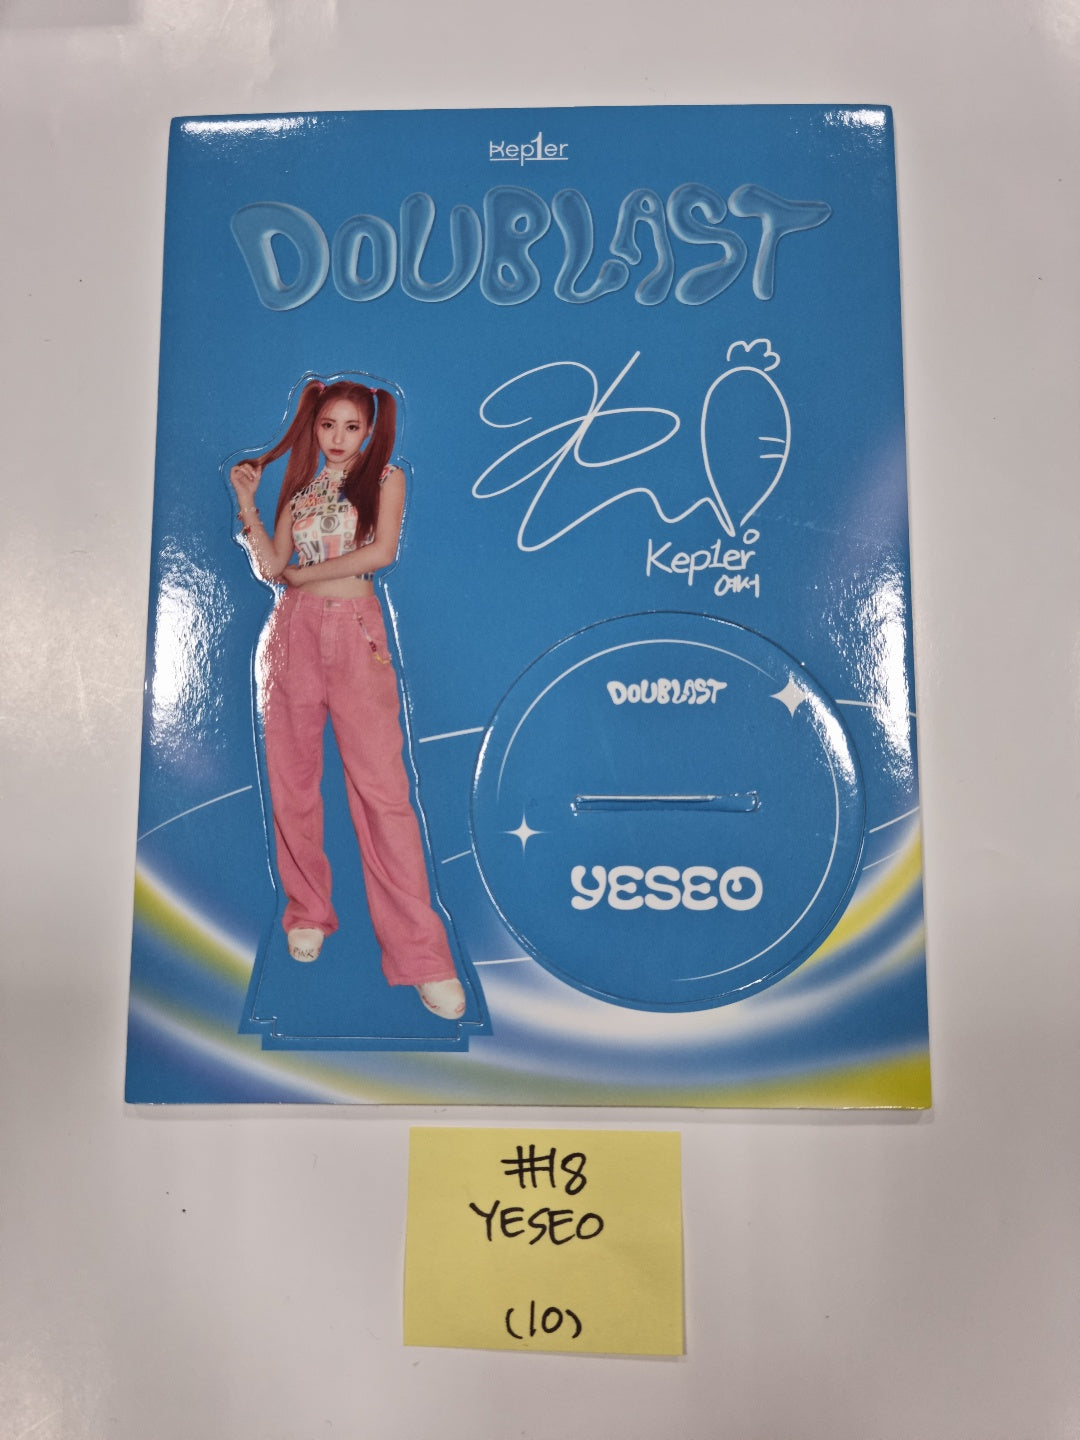 Kep1er "DOUBLAST" 2st - Official Photocard [Pop-Up Card, Photo Stand]